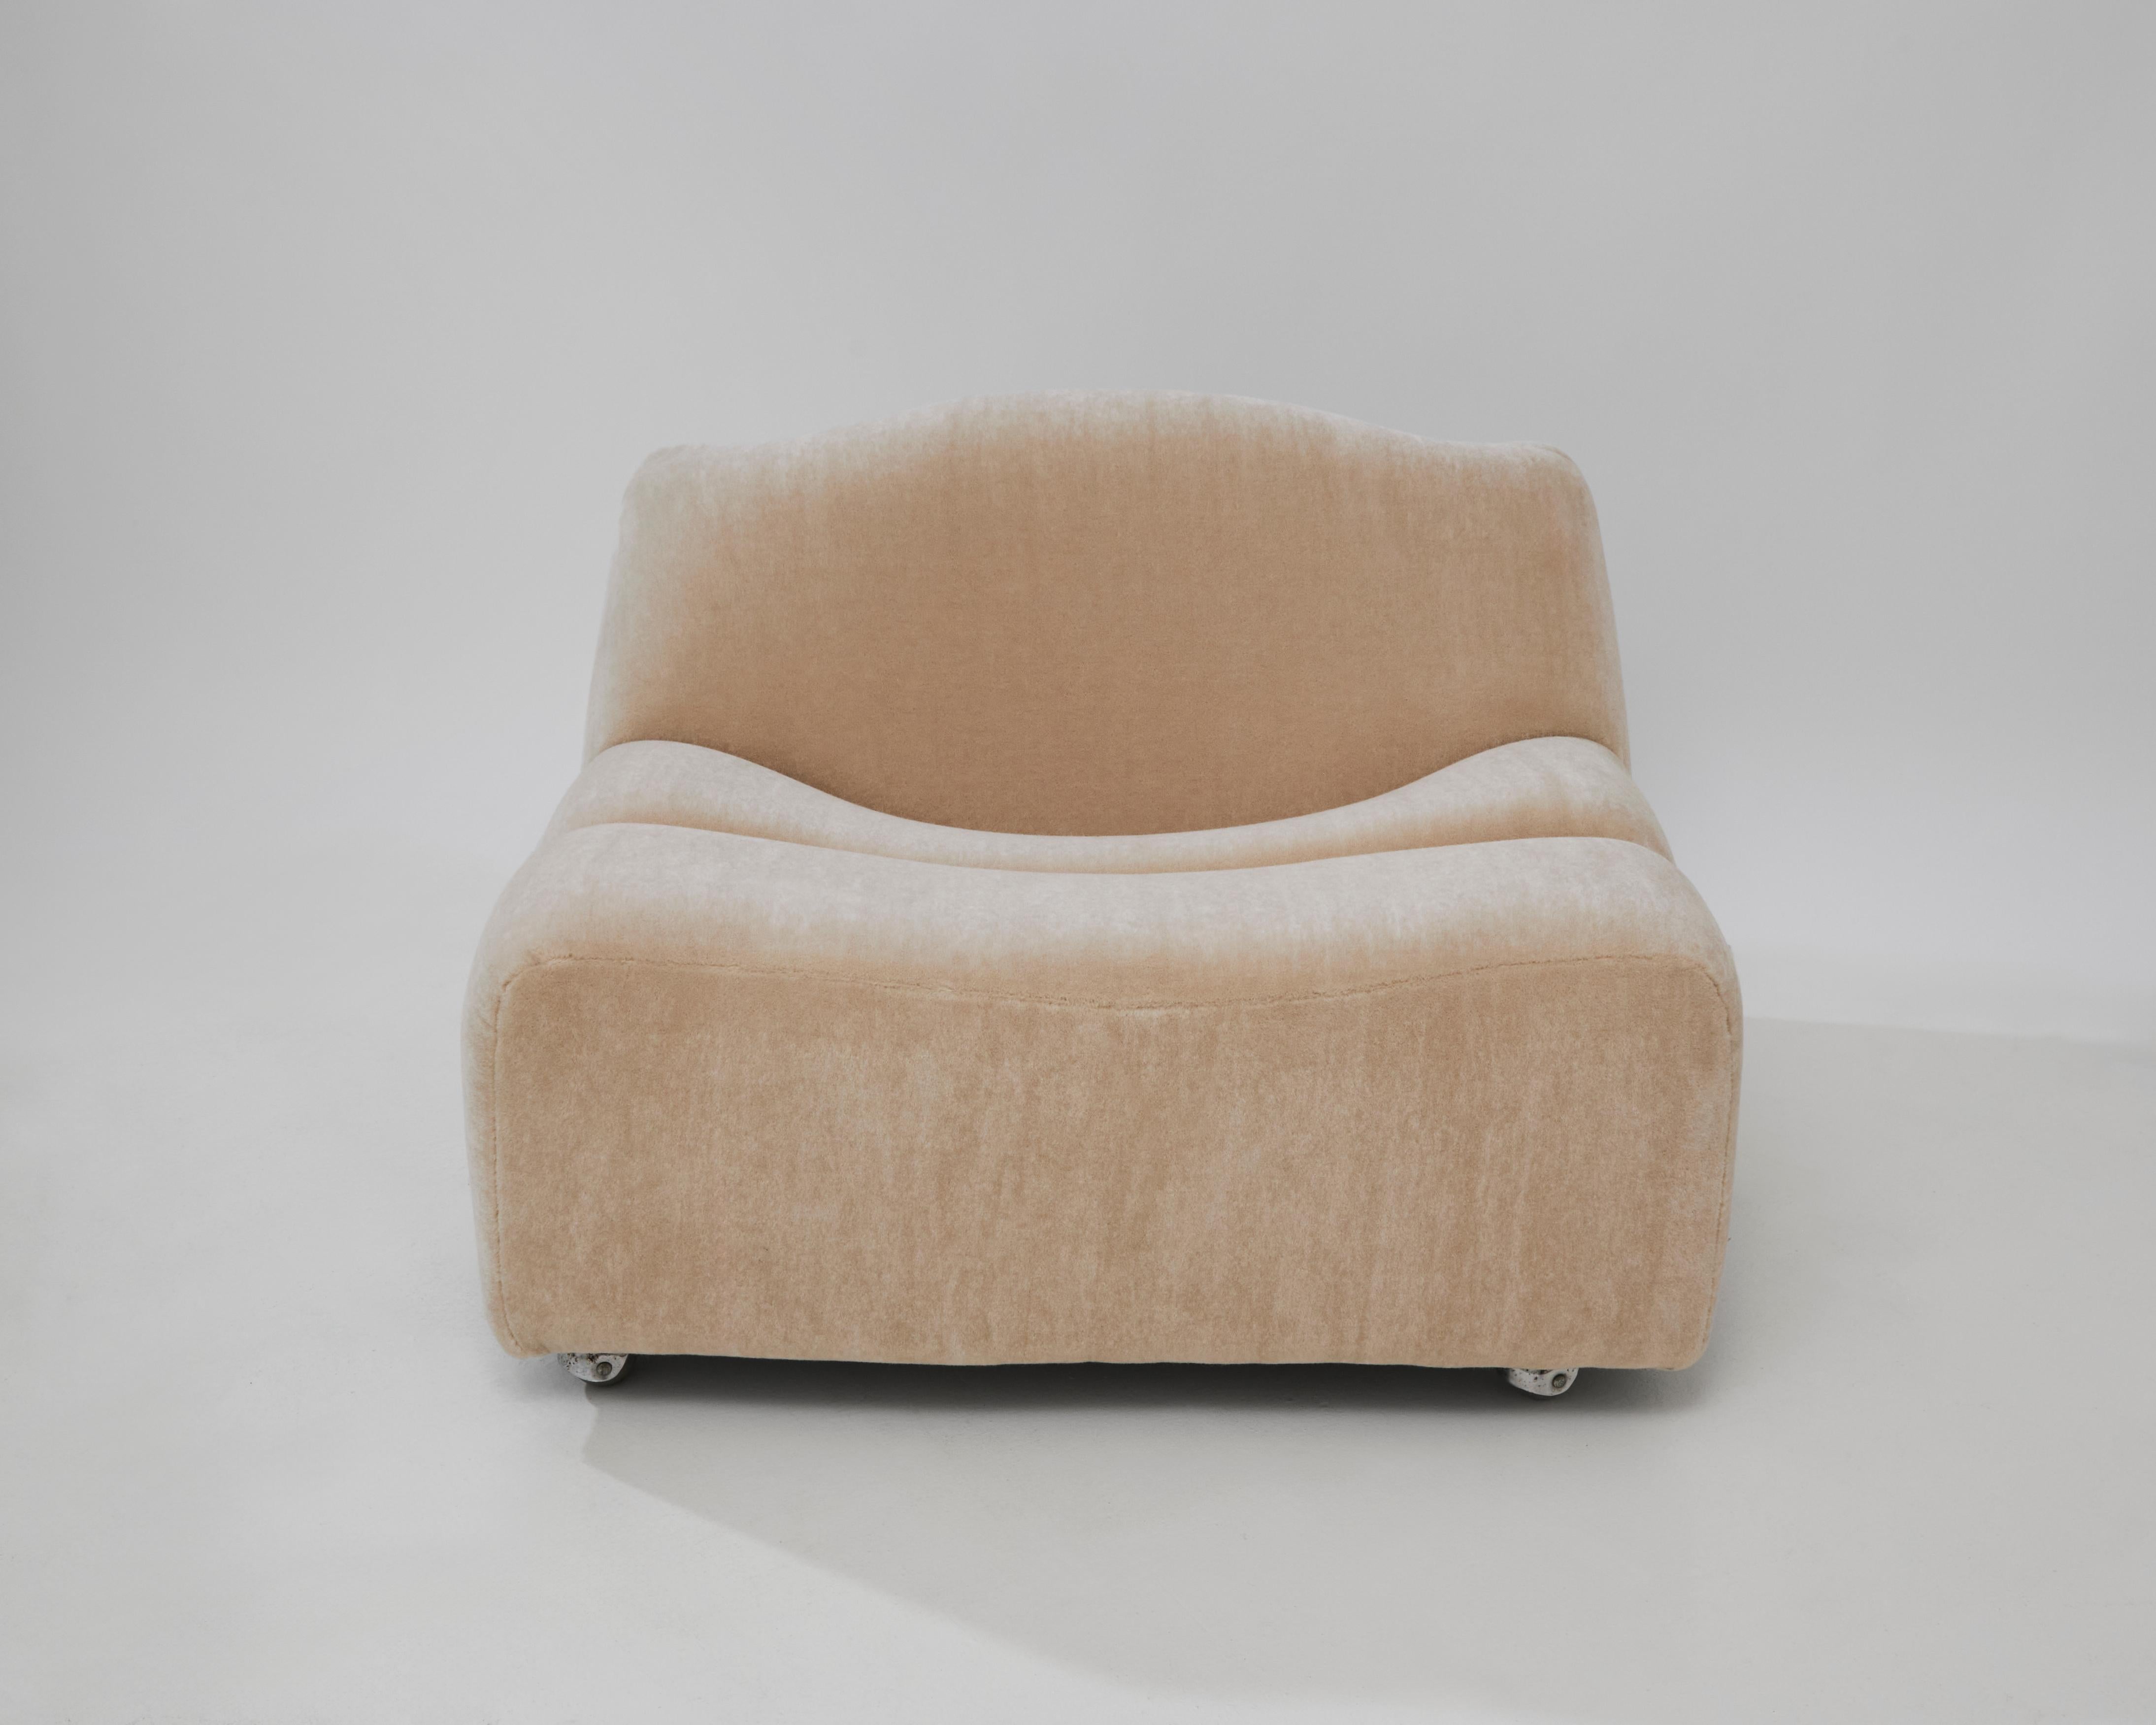 Incredible ABCD sofa, a sculptural one-seater designed by Pierre Paulin for Artifort in 1968. This sofa is comprised of three distinct segments distinguished by their wave-shaped curves. The gently sloping curved seats offer each user their own cozy